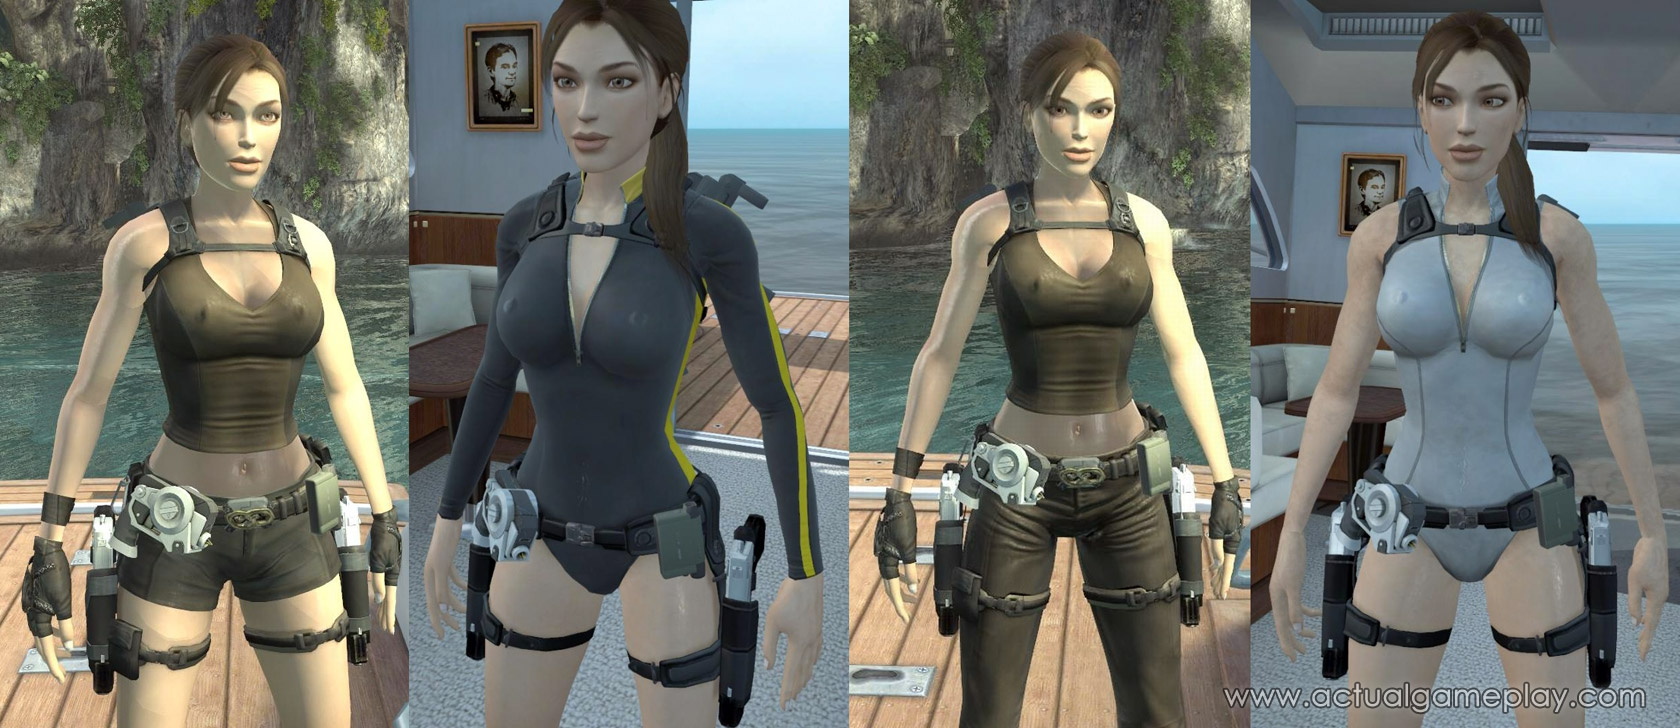 Bomber recommend best of tomb raider nude mods